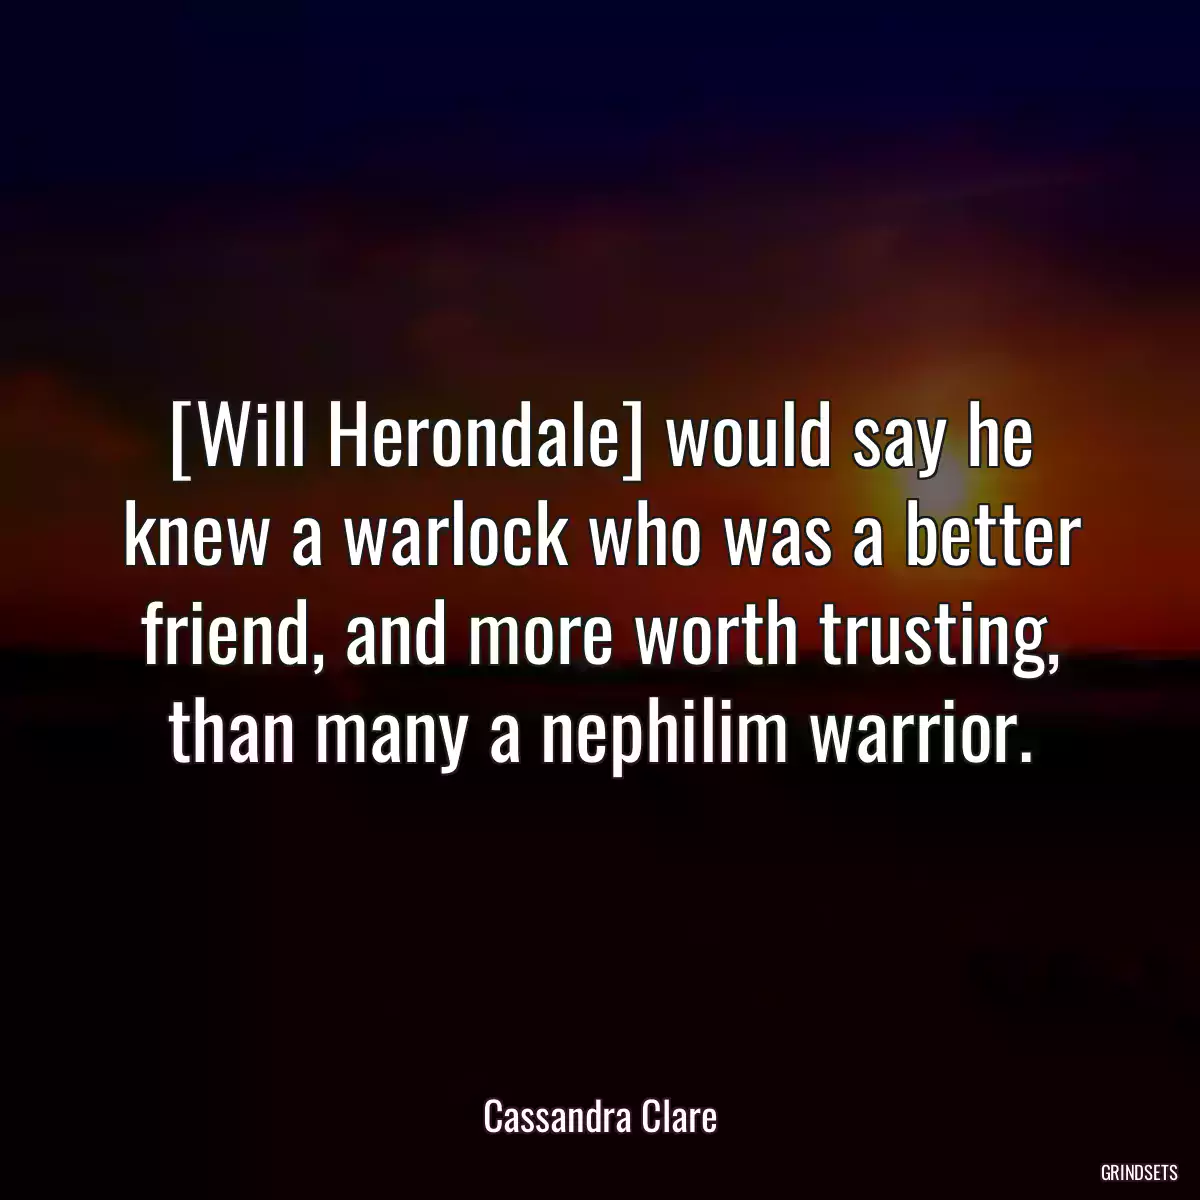 [Will Herondale] would say he knew a warlock who was a better friend, and more worth trusting, than many a nephilim warrior.